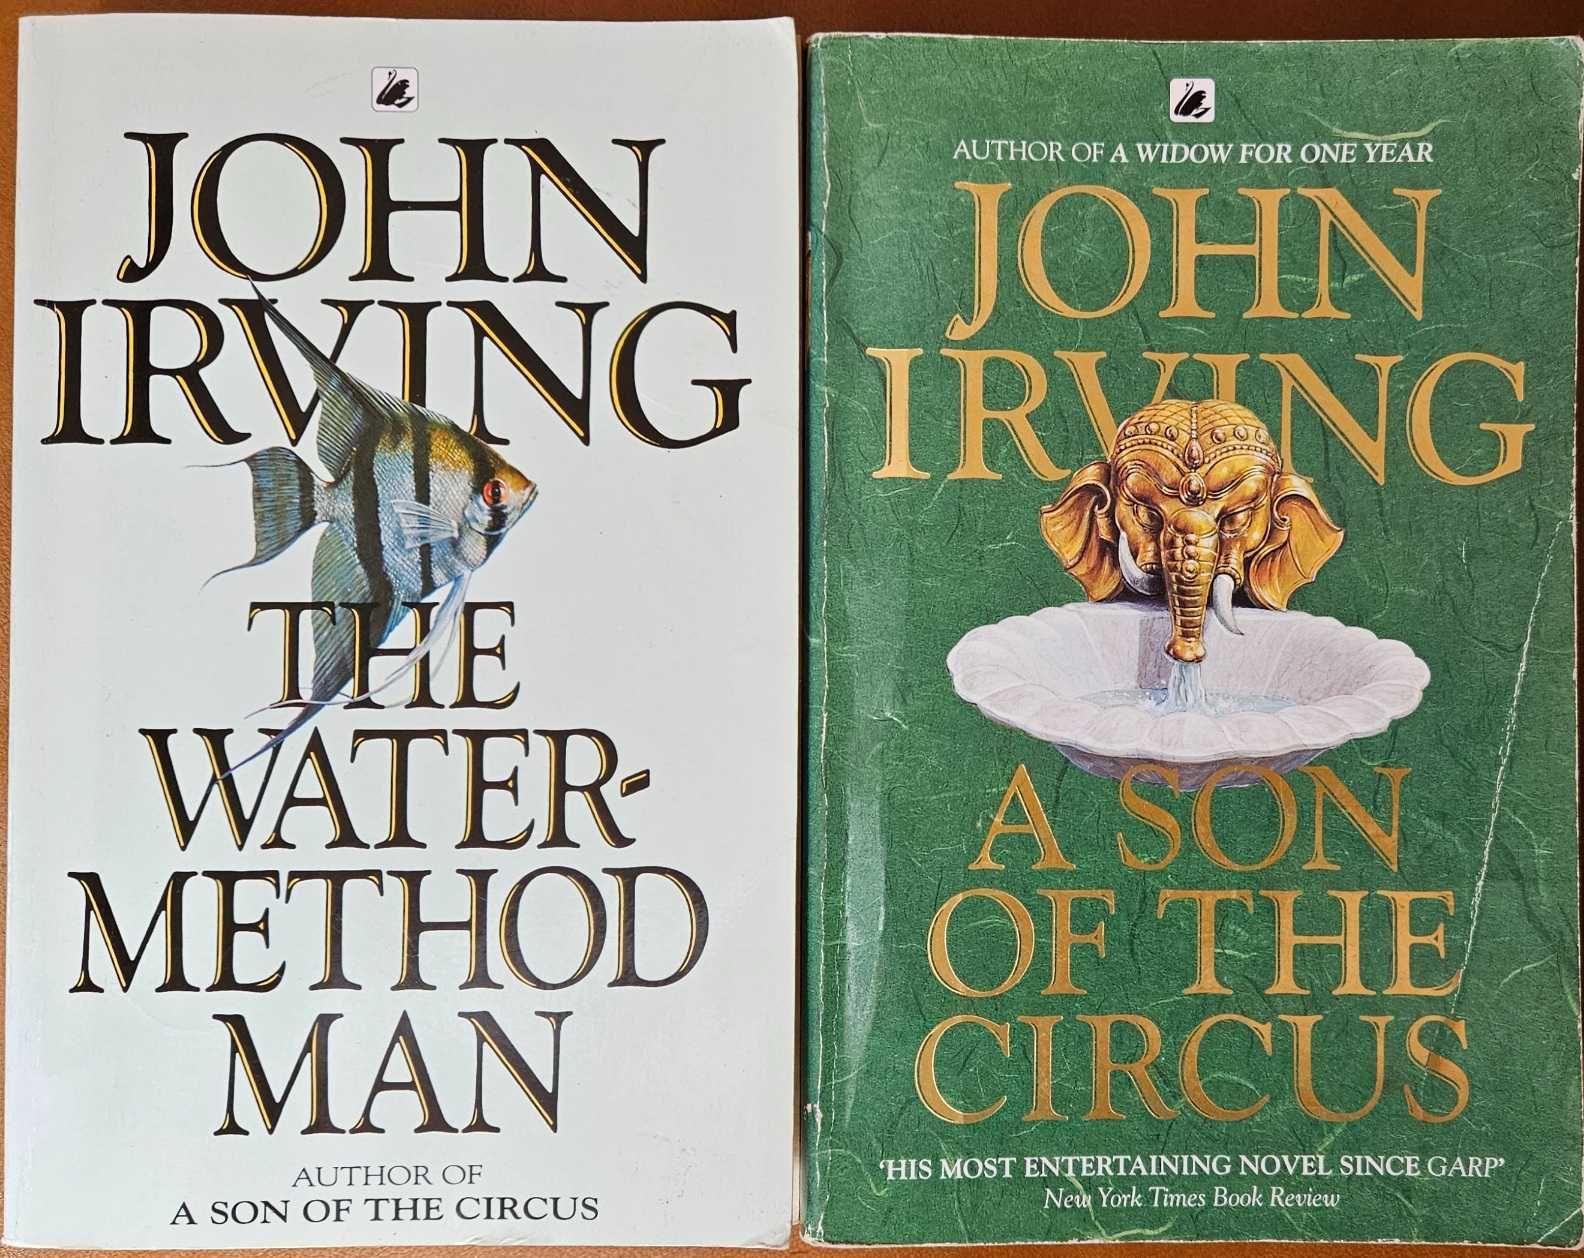 2 x John Irving -A Son of the Circus, The Water-Method Man